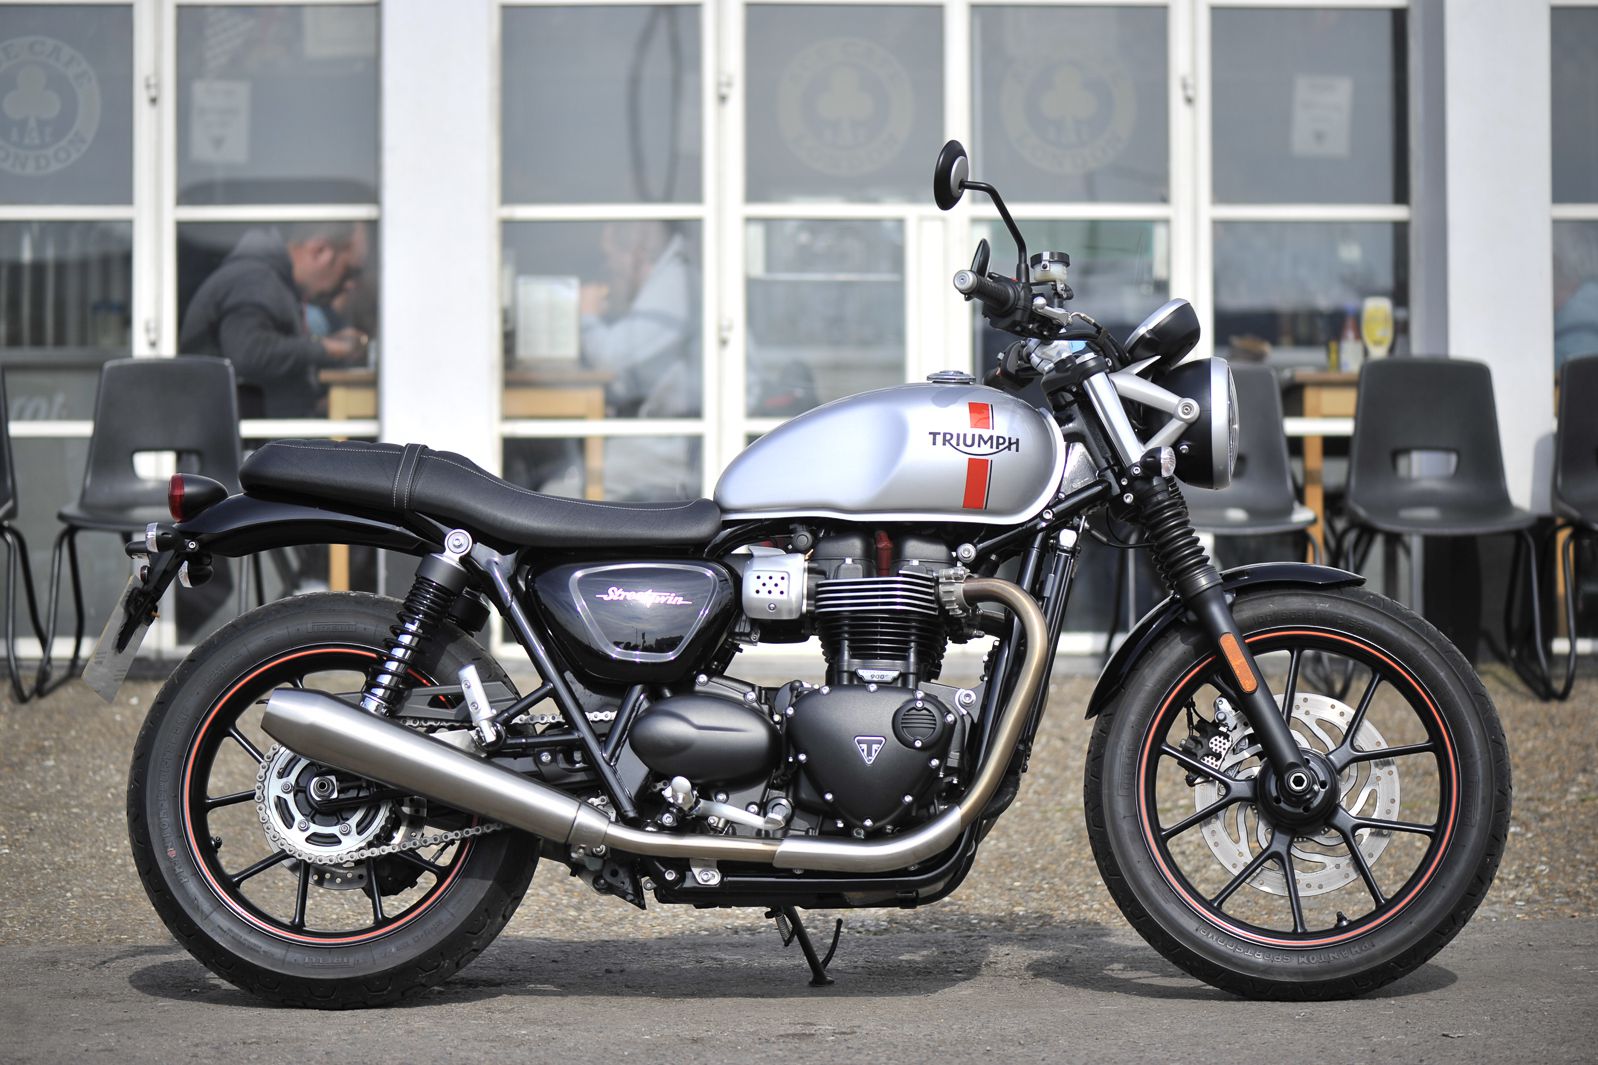 Triumph Bonneville Street Twin and T120 recalled over fire risk